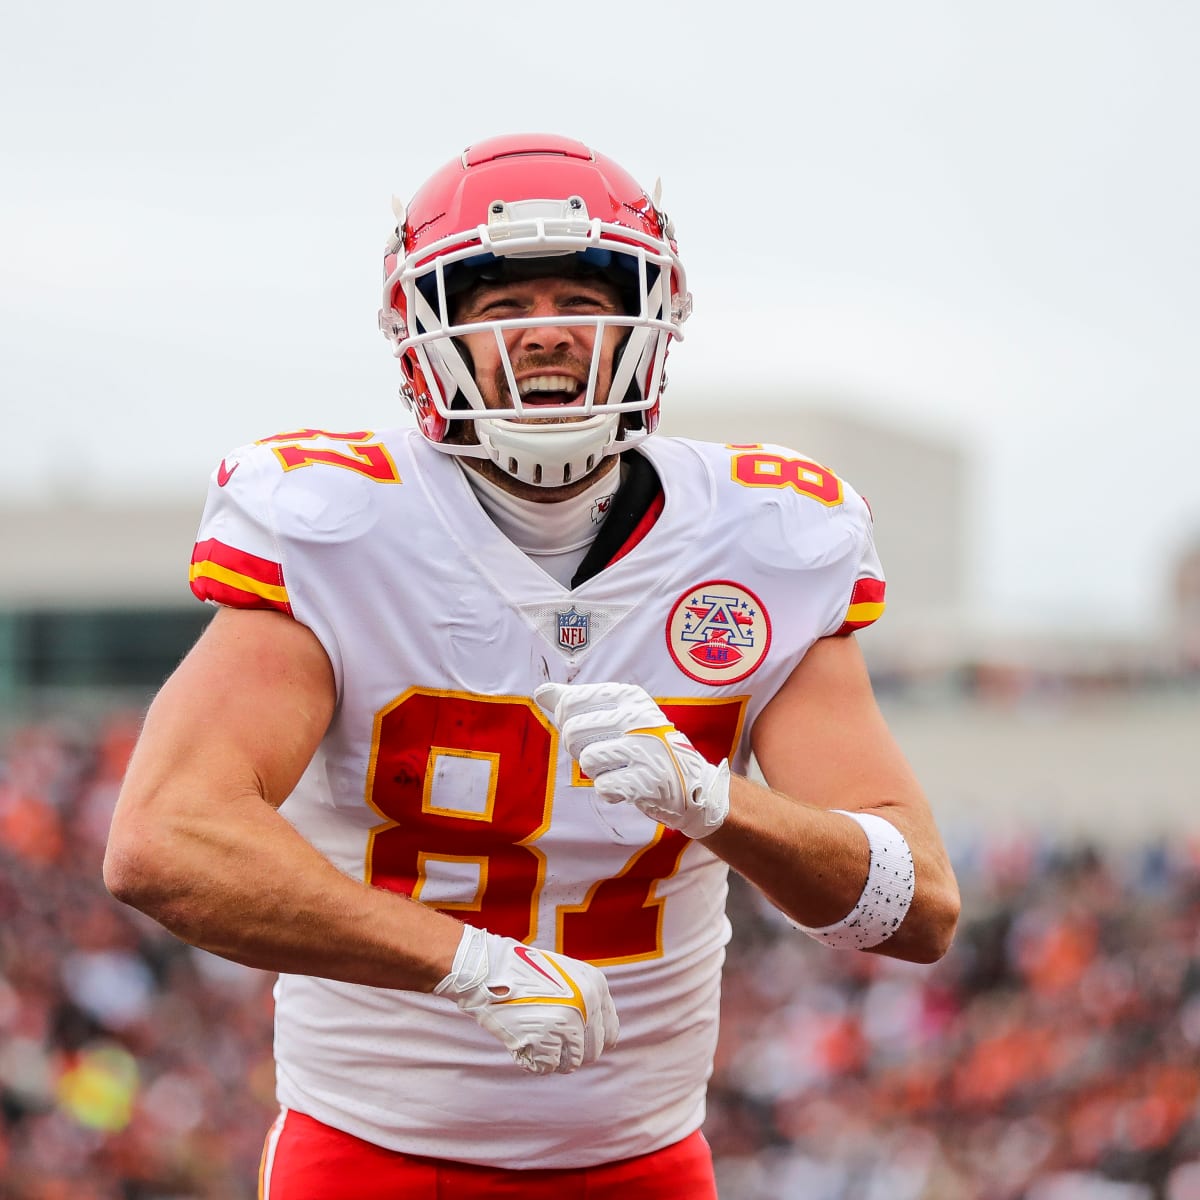 kelce for chiefs